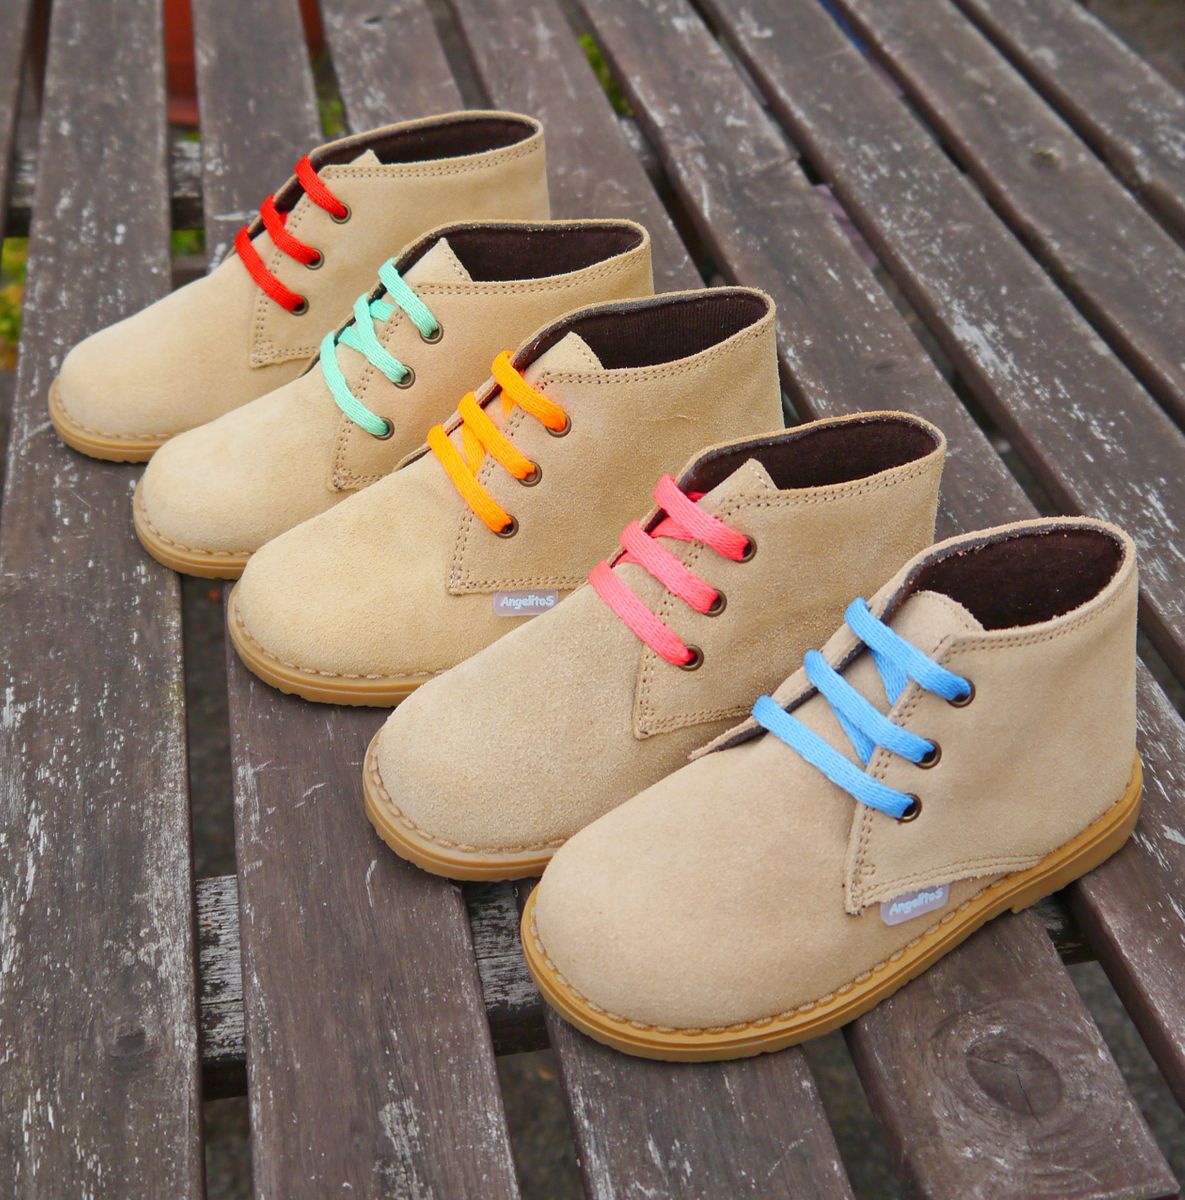 Angelitos Boots - Angelitos Lace up Desert Boots - Camel